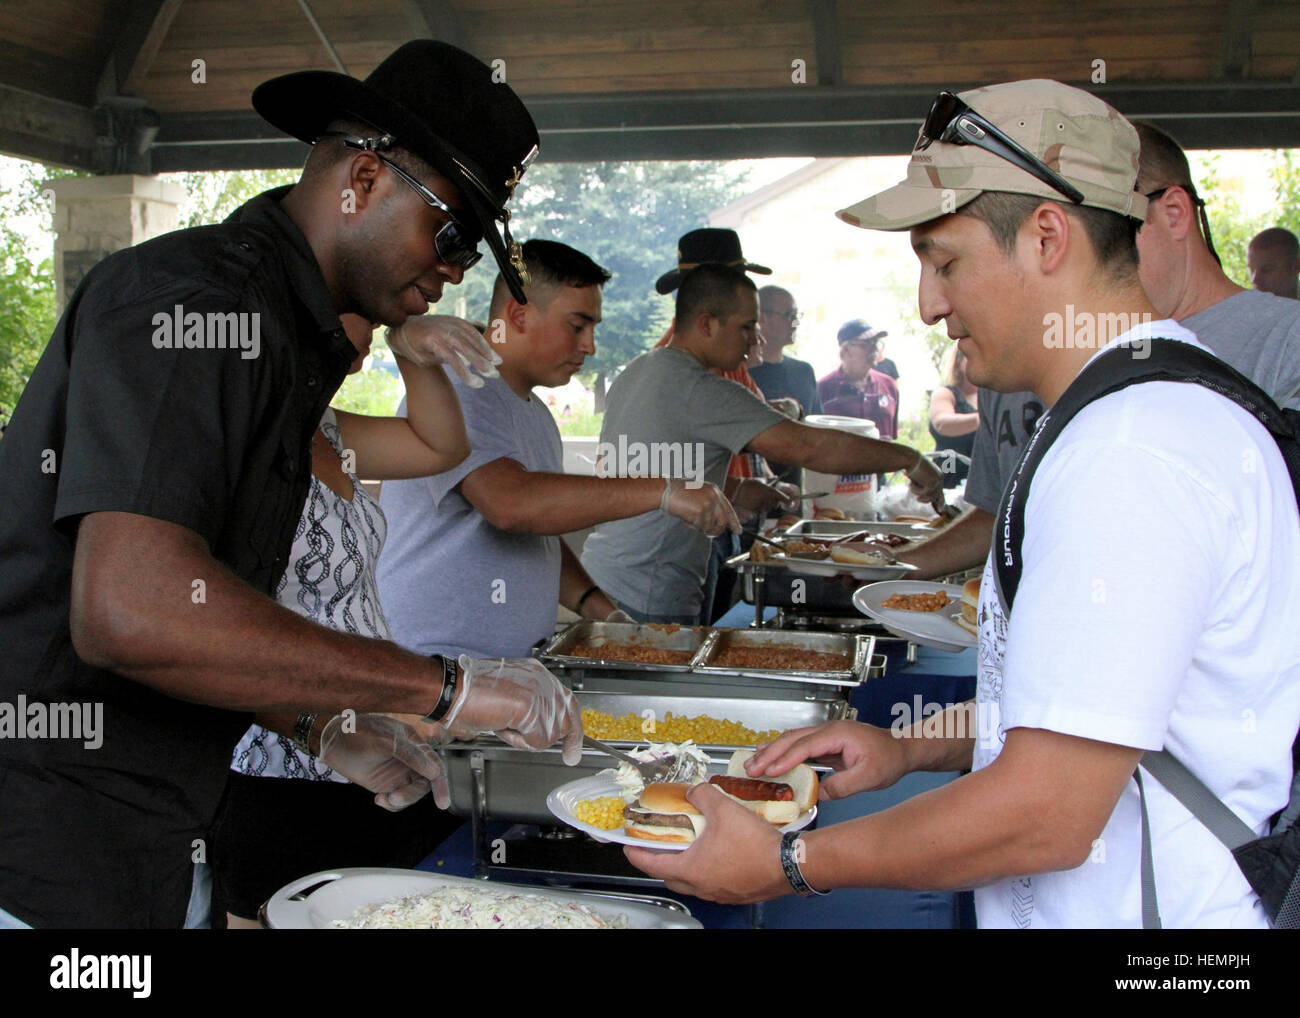 Manning, S.C., native, Capt. Matthew Canty (left), the human resources officer for the 2nd 'Stallion' Battalion, 8th Cavalry Regiment, 1st 'Ironhorse' Brigade Combat Team, 1st Cavalry Division, serves Lawrence, Mass., native, Sgt. Ricardo Perez (right)  pasta salad during a barbecue for Wounded Warriors and their families at BAMC, Sept. 6. 'It feels great to know someone cares about us,' said Perez, who is a soldier currently assigned to the Warrior Transition Unit at the Brooke Army Medical Center in San Antonio. (U.S. Army photo by Sgt. Bailey Kramer, 1st BCT PAO, 1st Cav. Div.) Stallions, S Stock Photo